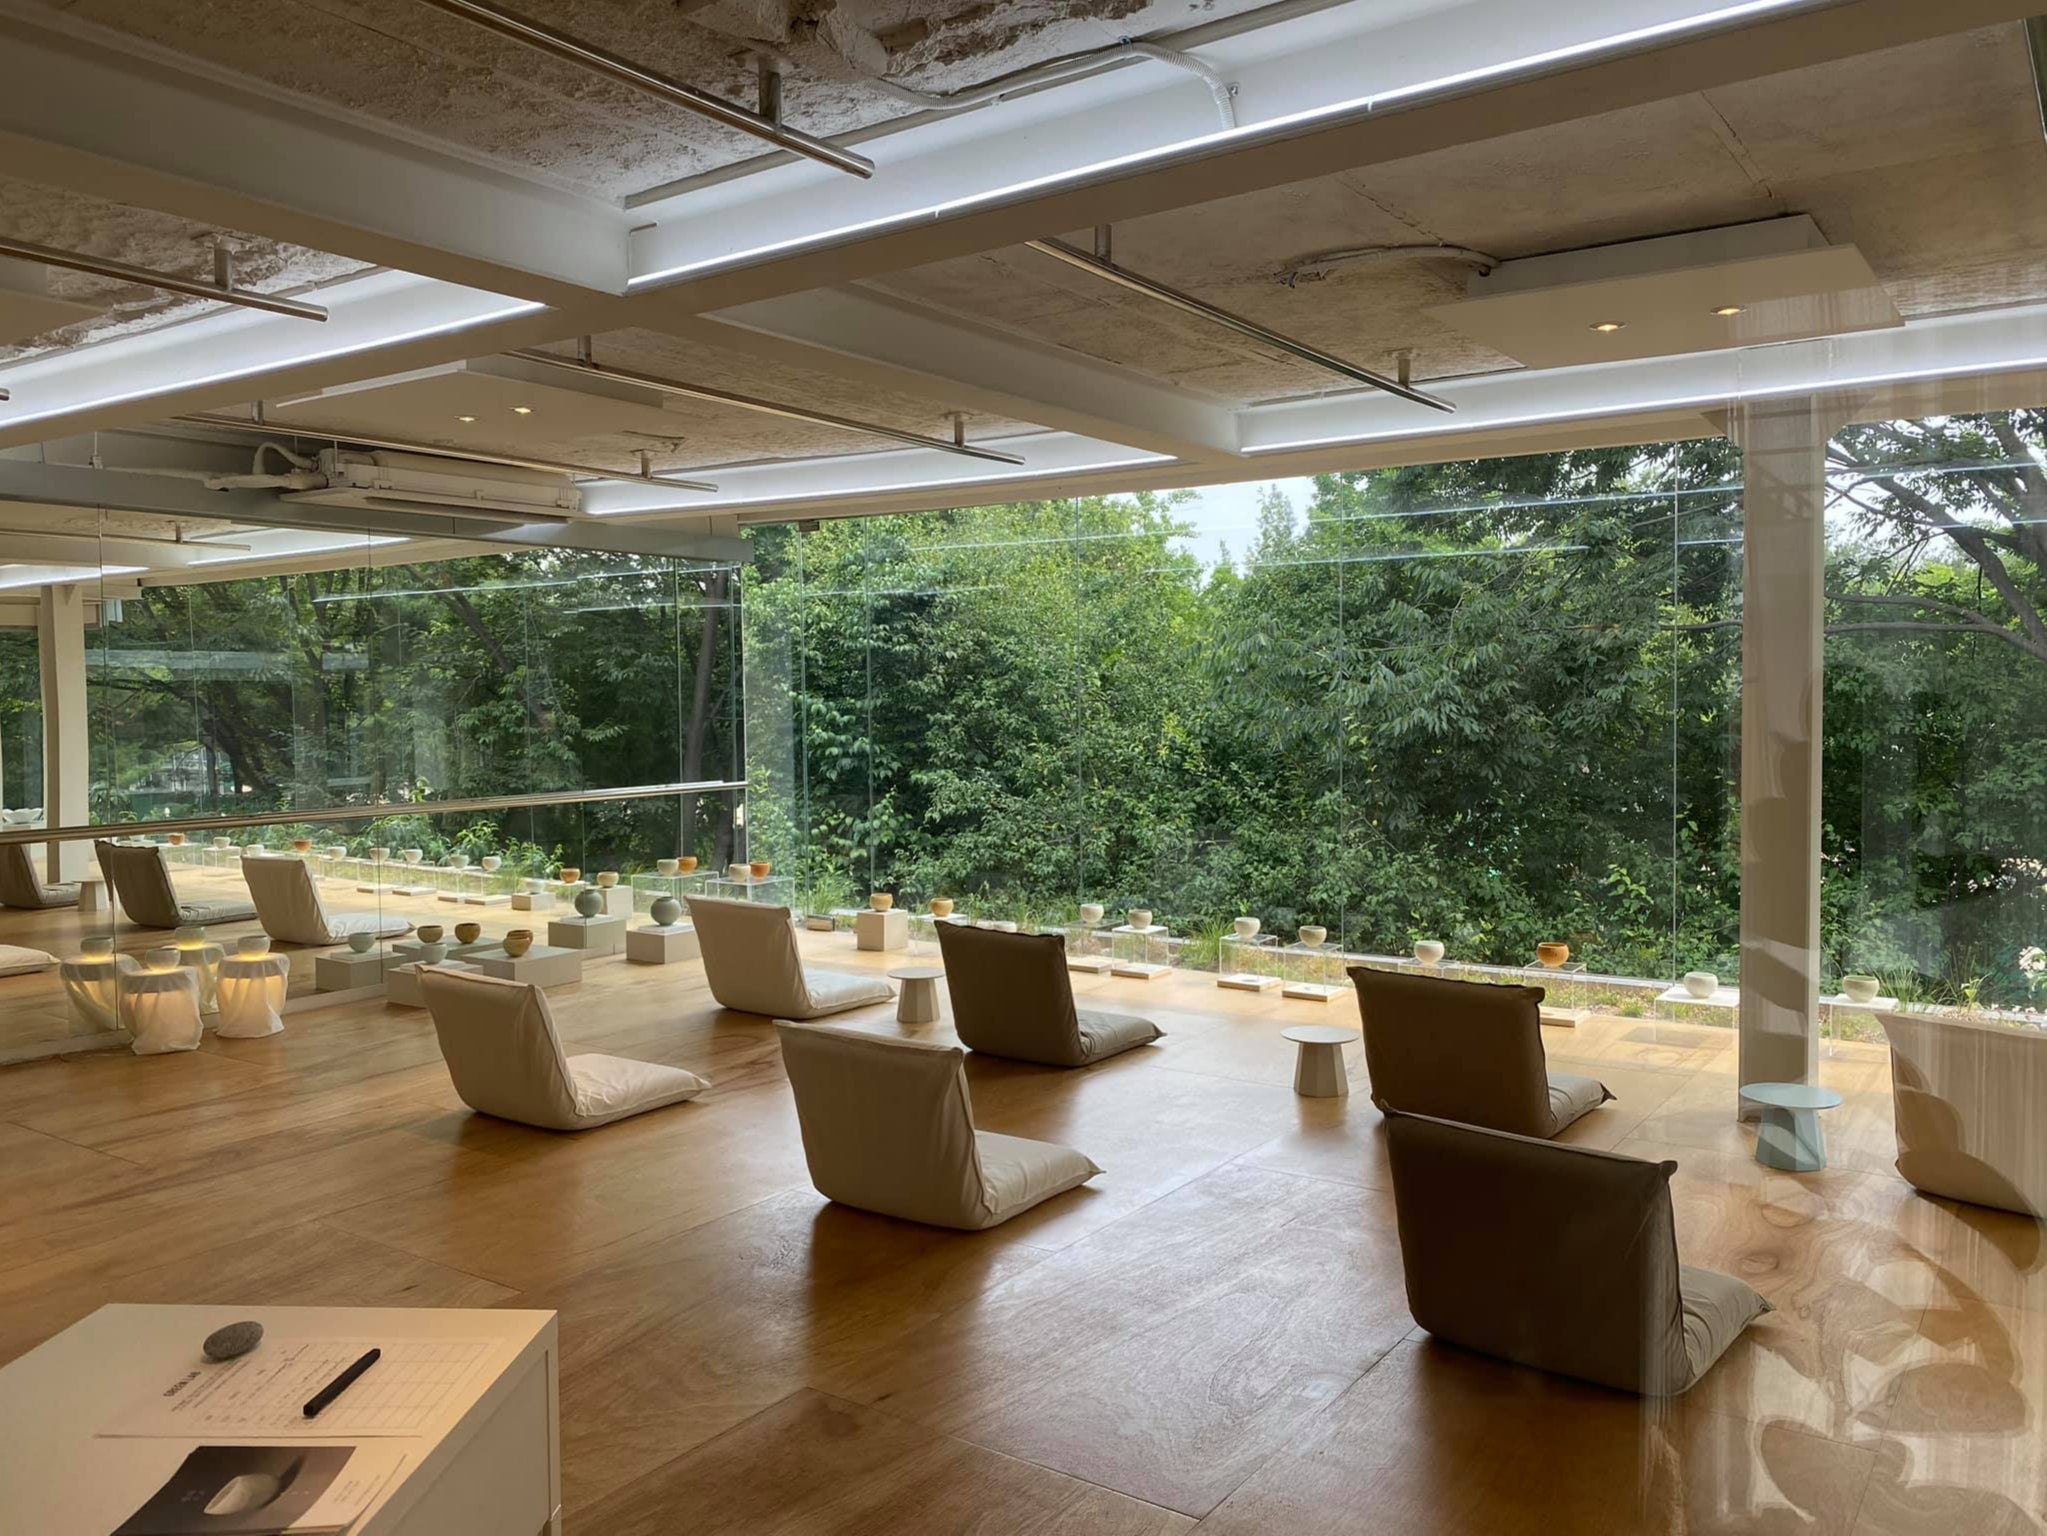 The Green Lab cafe near Seoul Forest allows customers to book a slot to sit in peace and quiet